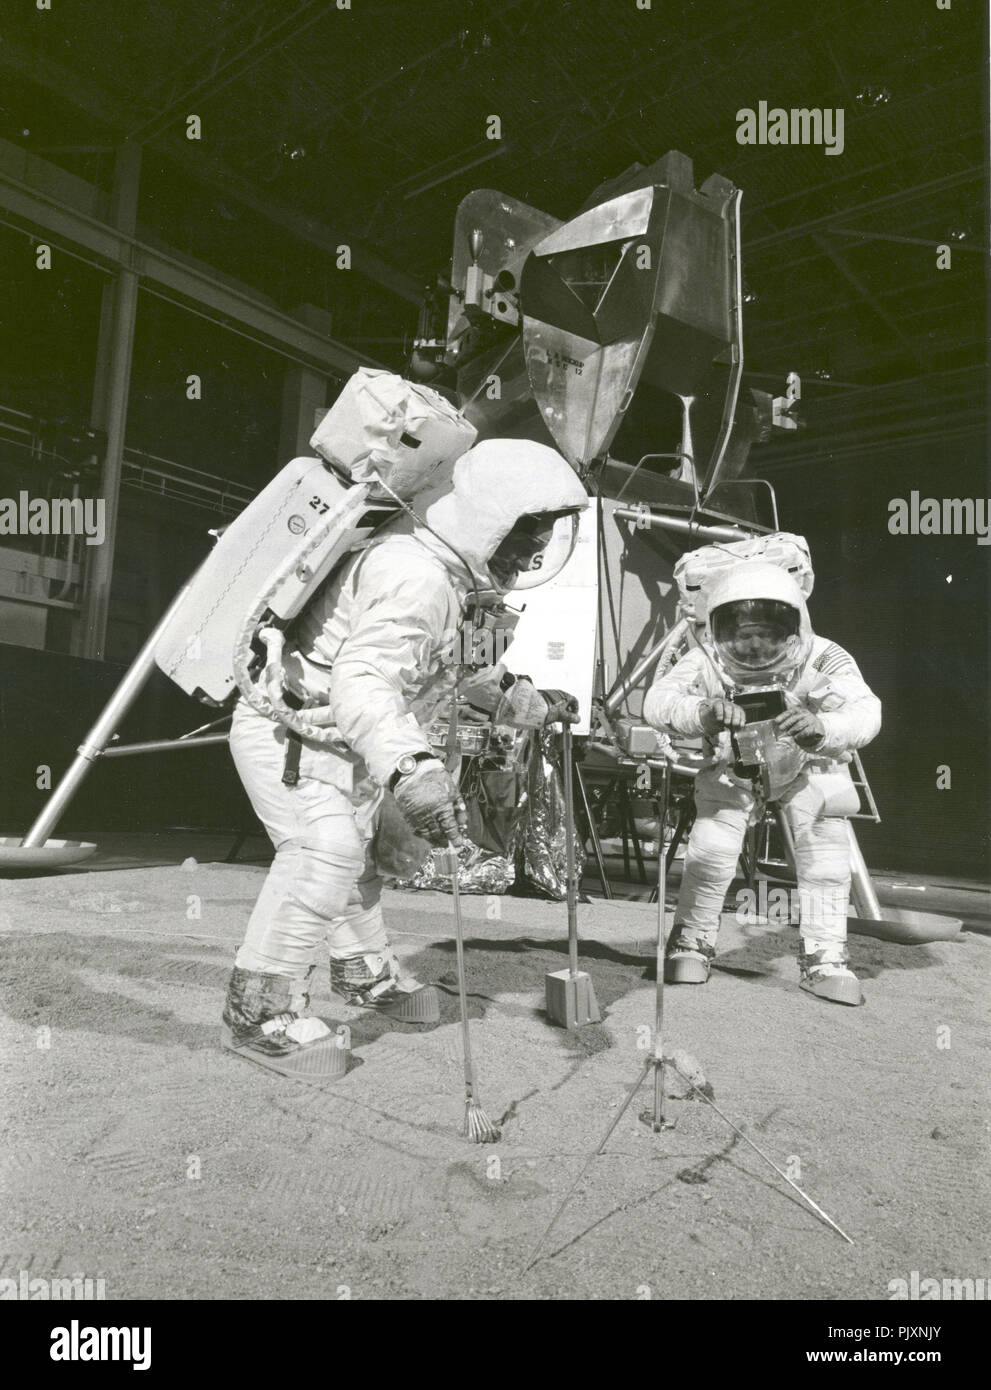 Houston, TX - (FILE) -- Two members of the Apollo 11 lunar landing mission participate in a simulation of deploying and using lunar tools on the surface of the Moon during a training exercise on April 22, 1969. Astronaut Buzz (Aldrin Jr. on left), lunar module pilot, uses a scoop and tongs to pick up a soil sample. Astronaut Neil A. Armstrong, Apollo 11 commander, holds a bag to receive the sample. In the background is a Lunar Module mockup. Credit: NASA via CNP /MediaPunch Stock Photo